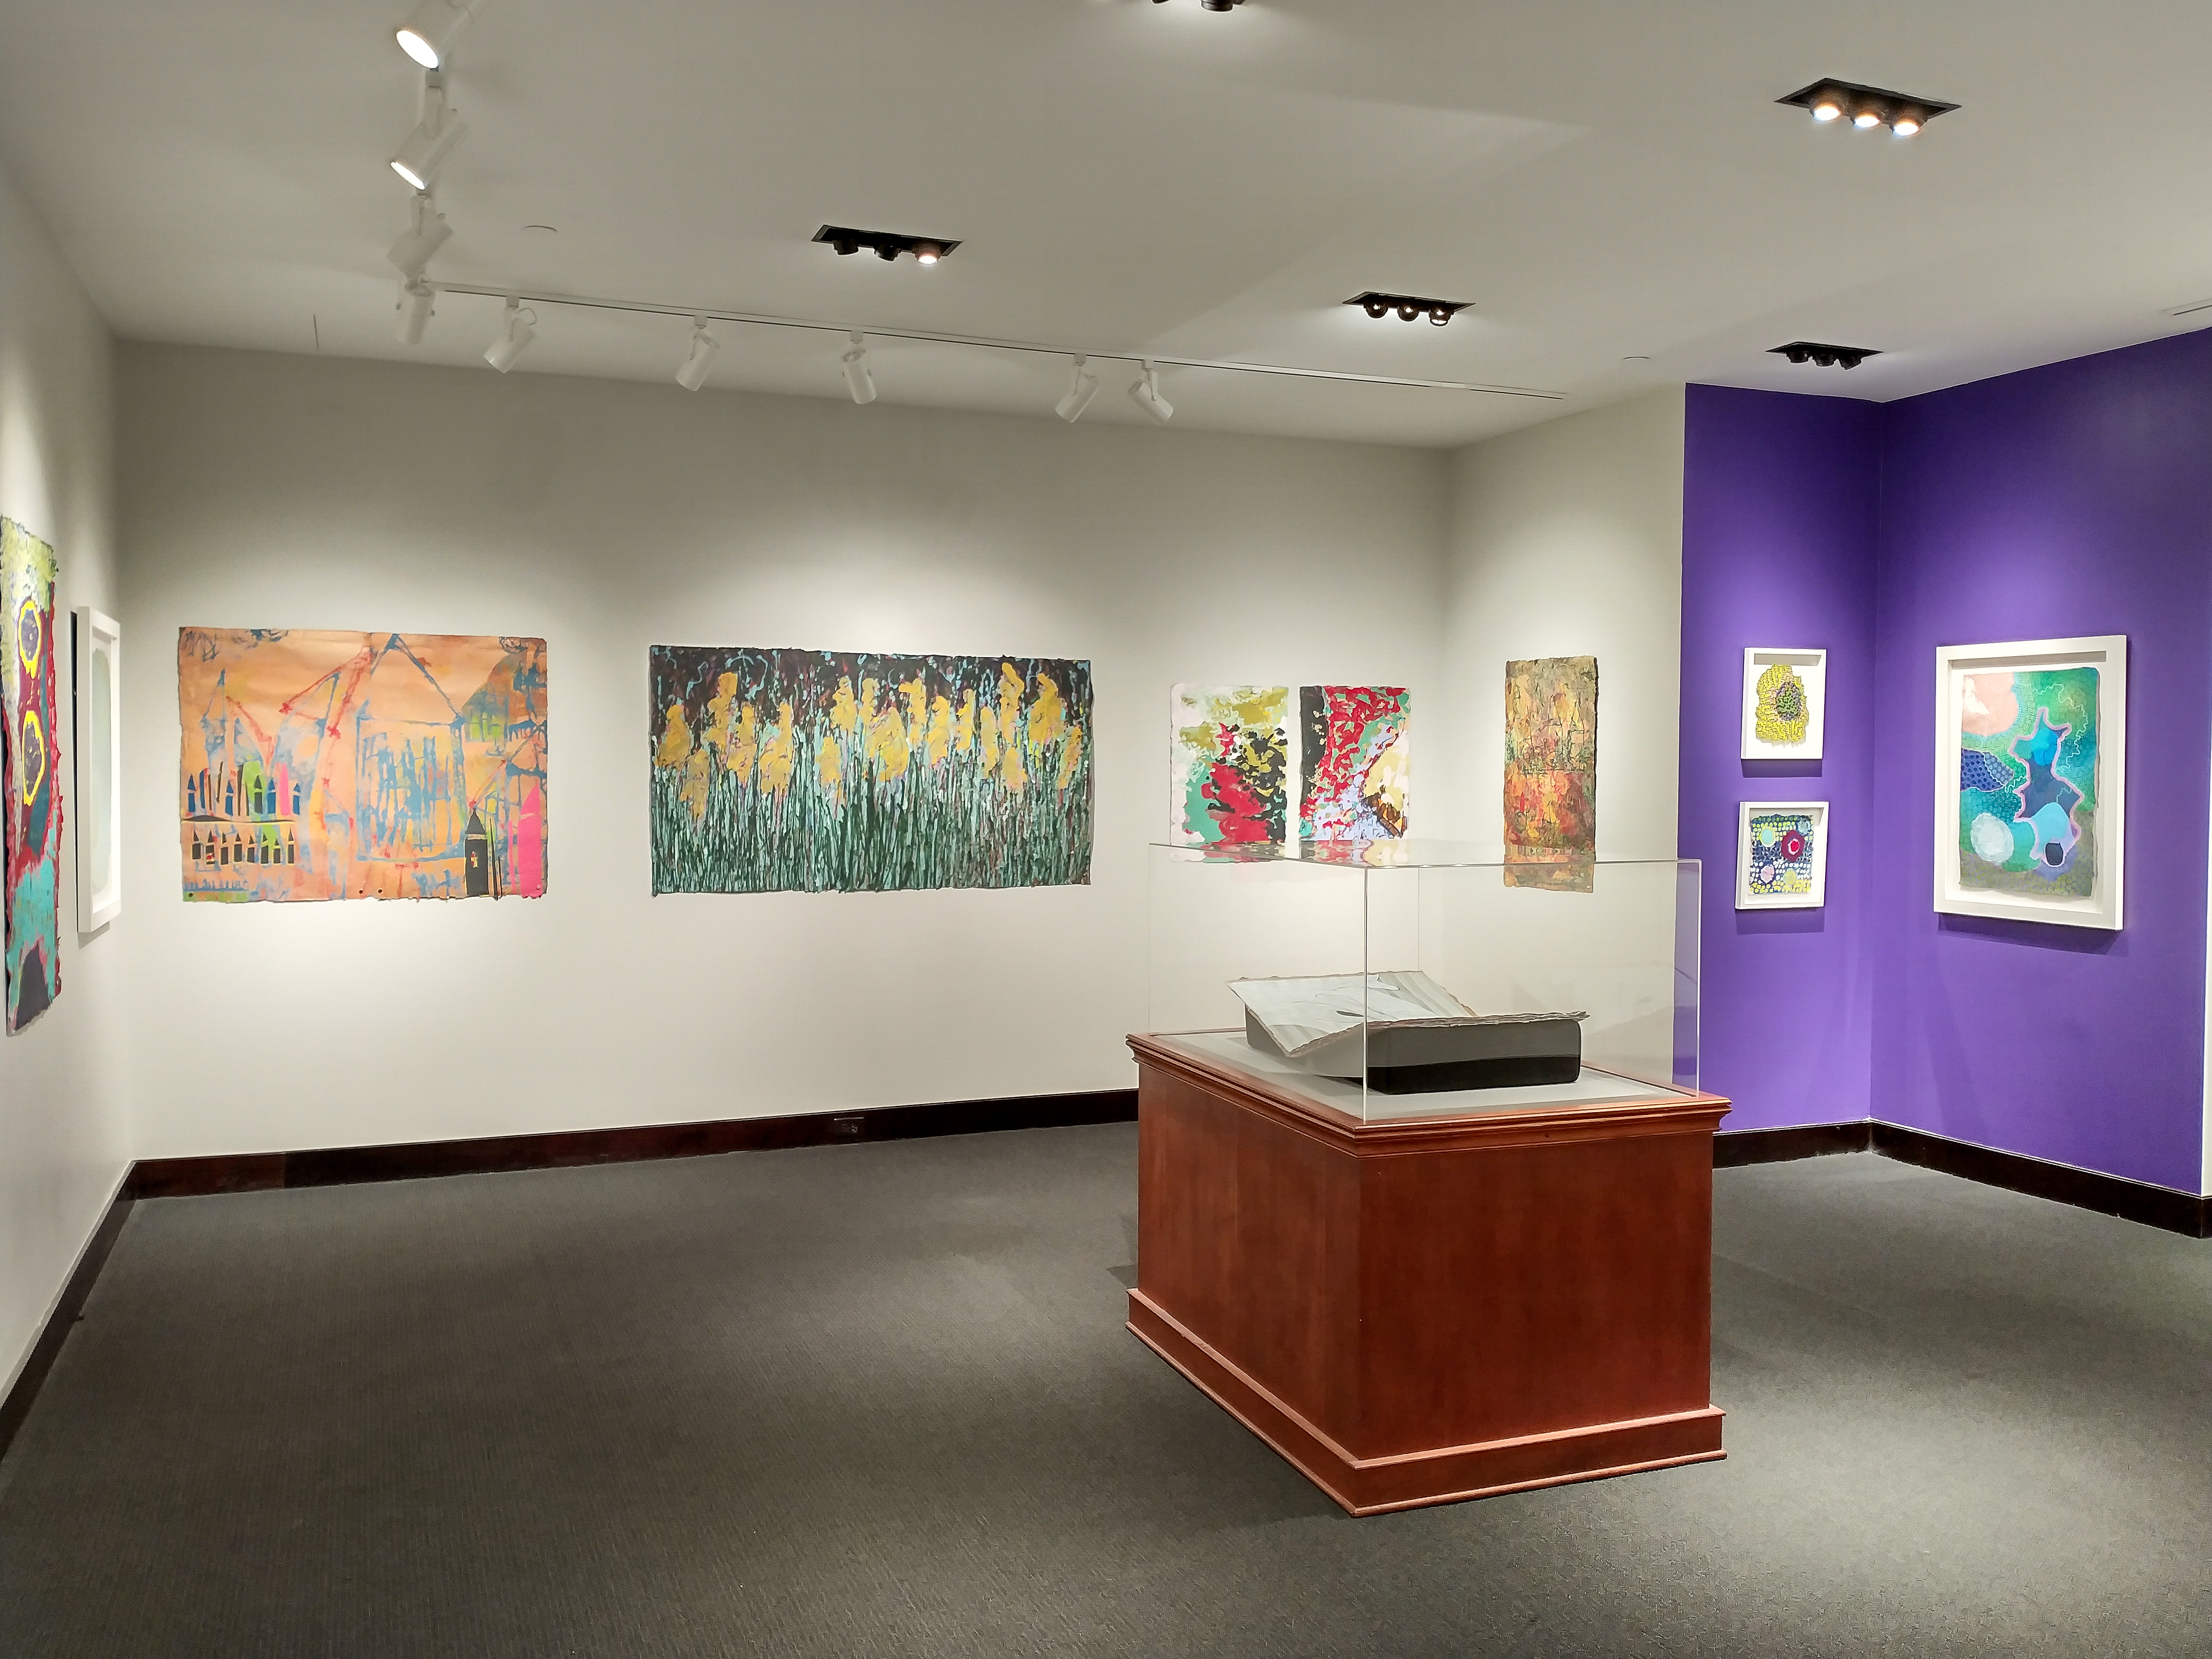 The west wall of the large gallery features a peach colored diptych by Lea Basile-Lazarus titled, The Unusuals. The peach foundation of the work has line drawings in sky blue of houses with small accents of hot pink and lime green. At the center of the wall a triptych titled Invisible Lines by Andrea Peterson renders a field full of flowering stalks in a loose sketchy style. The primary palette is dark green, sky blue, golden yellow with a maroon sky. To the right of Invisible Lines are two more pieces by Andrea Peterson. They are placed closer to one another due to their shared palette. The pieces From Under and Sun Rising include white, turquoise, dark red, black and a brassy yellow swirling around.